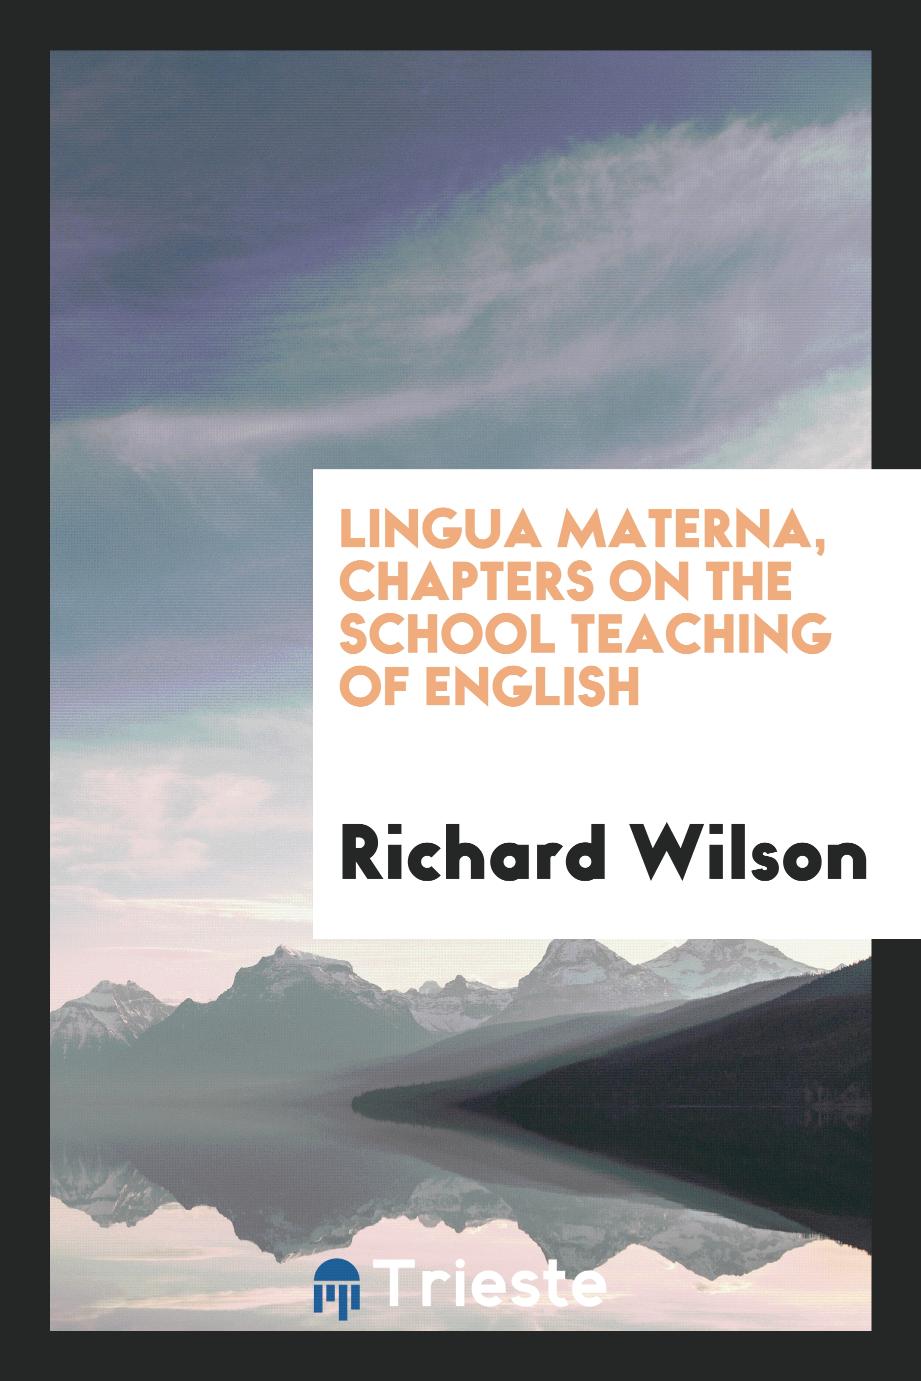 Lingua materna, chapters on the school teaching of English